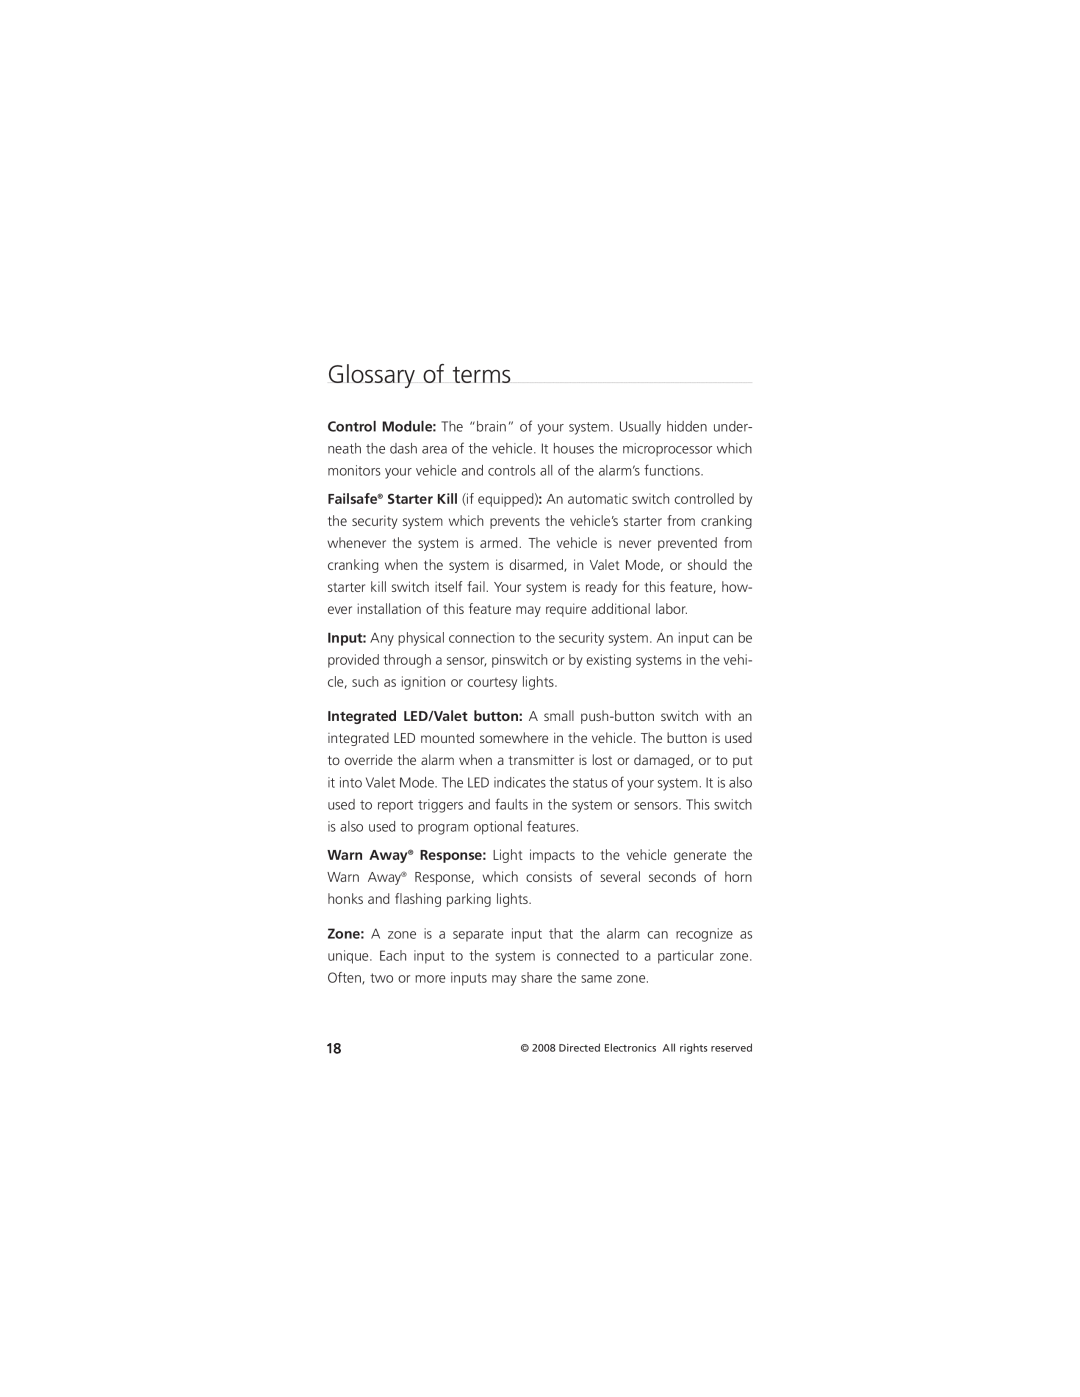 Directed Electronics AM5 manual Glossary of terms 